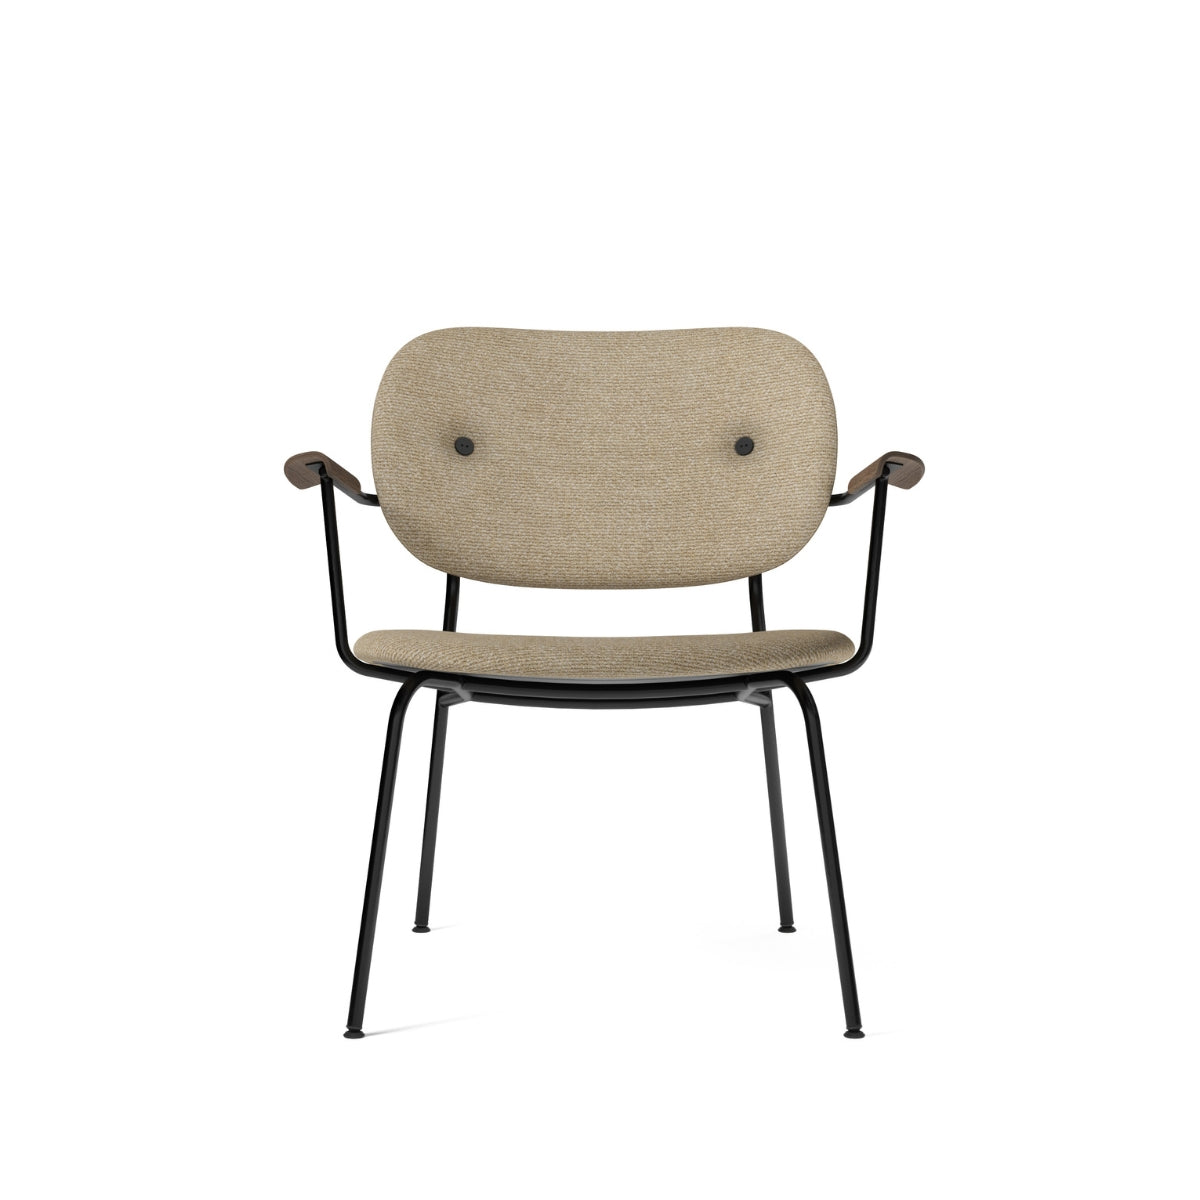 Audo Copenhagen | Co Lounge Chair – Upholstered Seat and Back